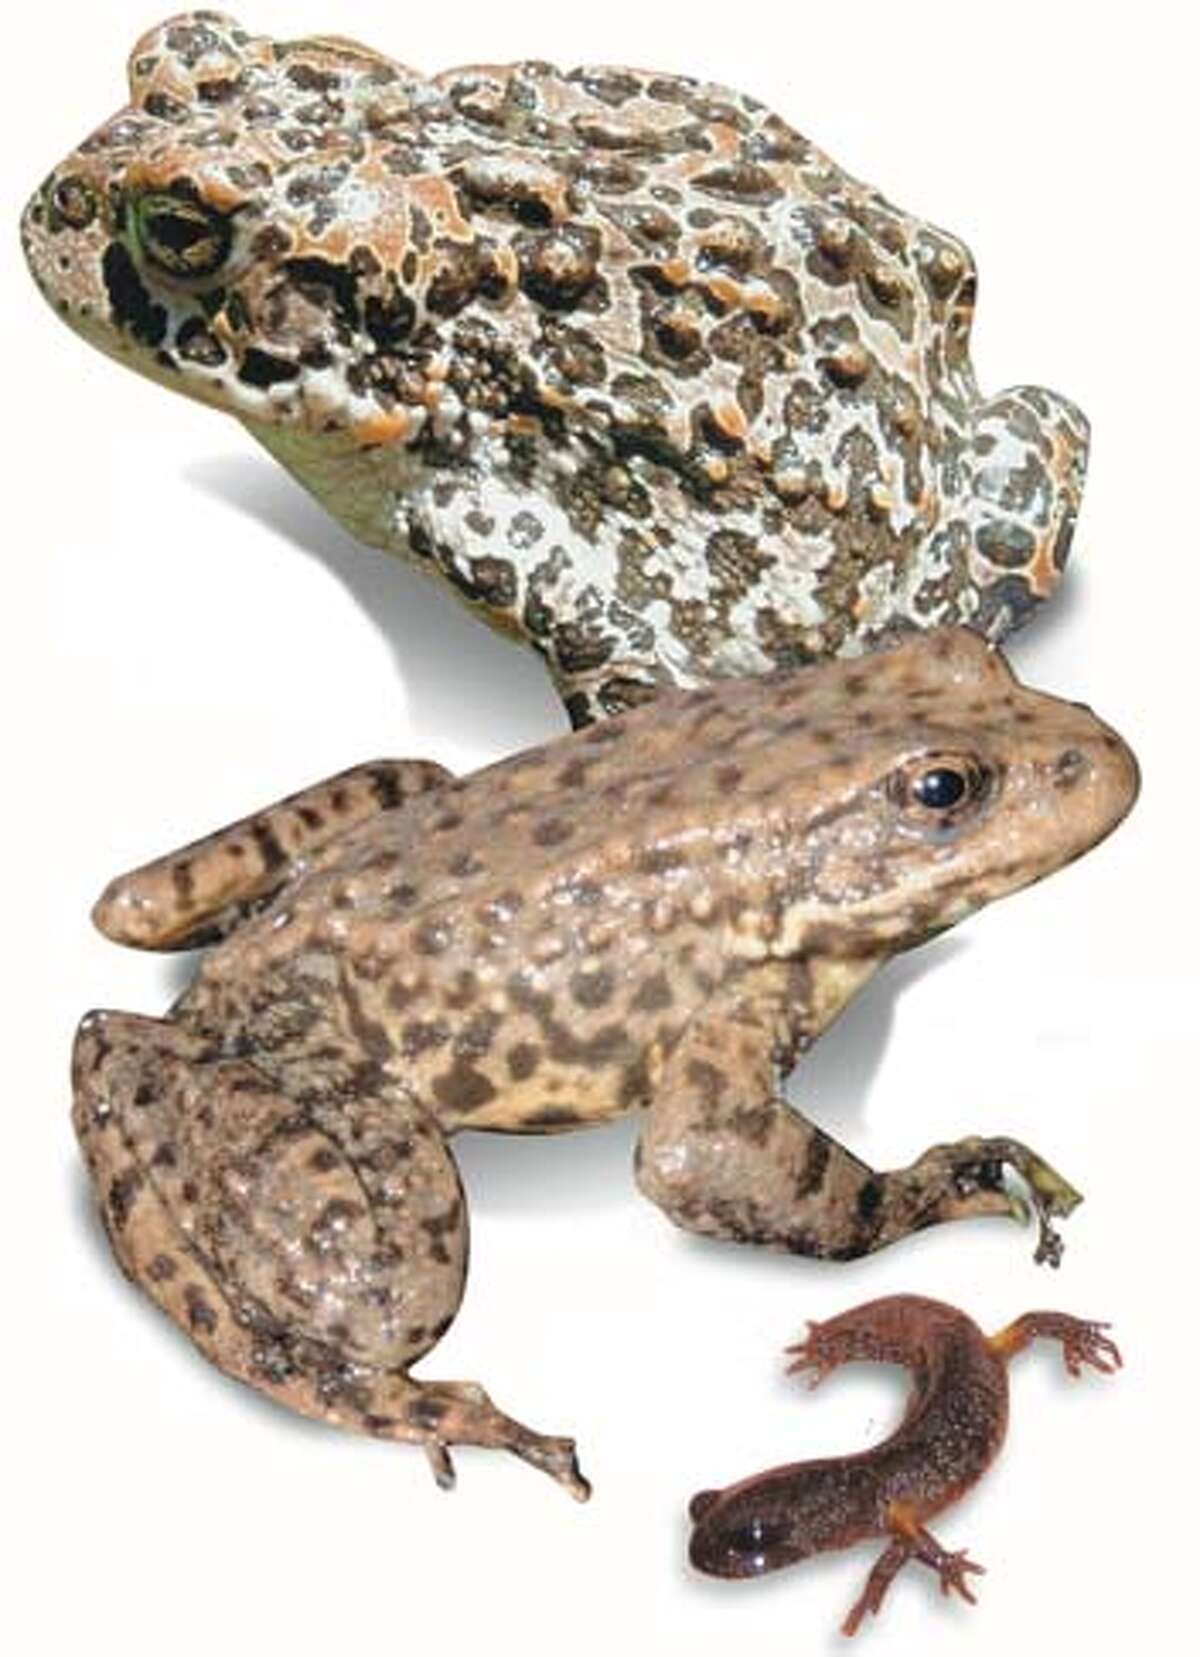 From top to bottom: Yosemite toad, Yellow-legged frog, Siskiyou salamander. Photos by I�igo Martinez-Solano and Noah Greenwald, special to the Chronicle